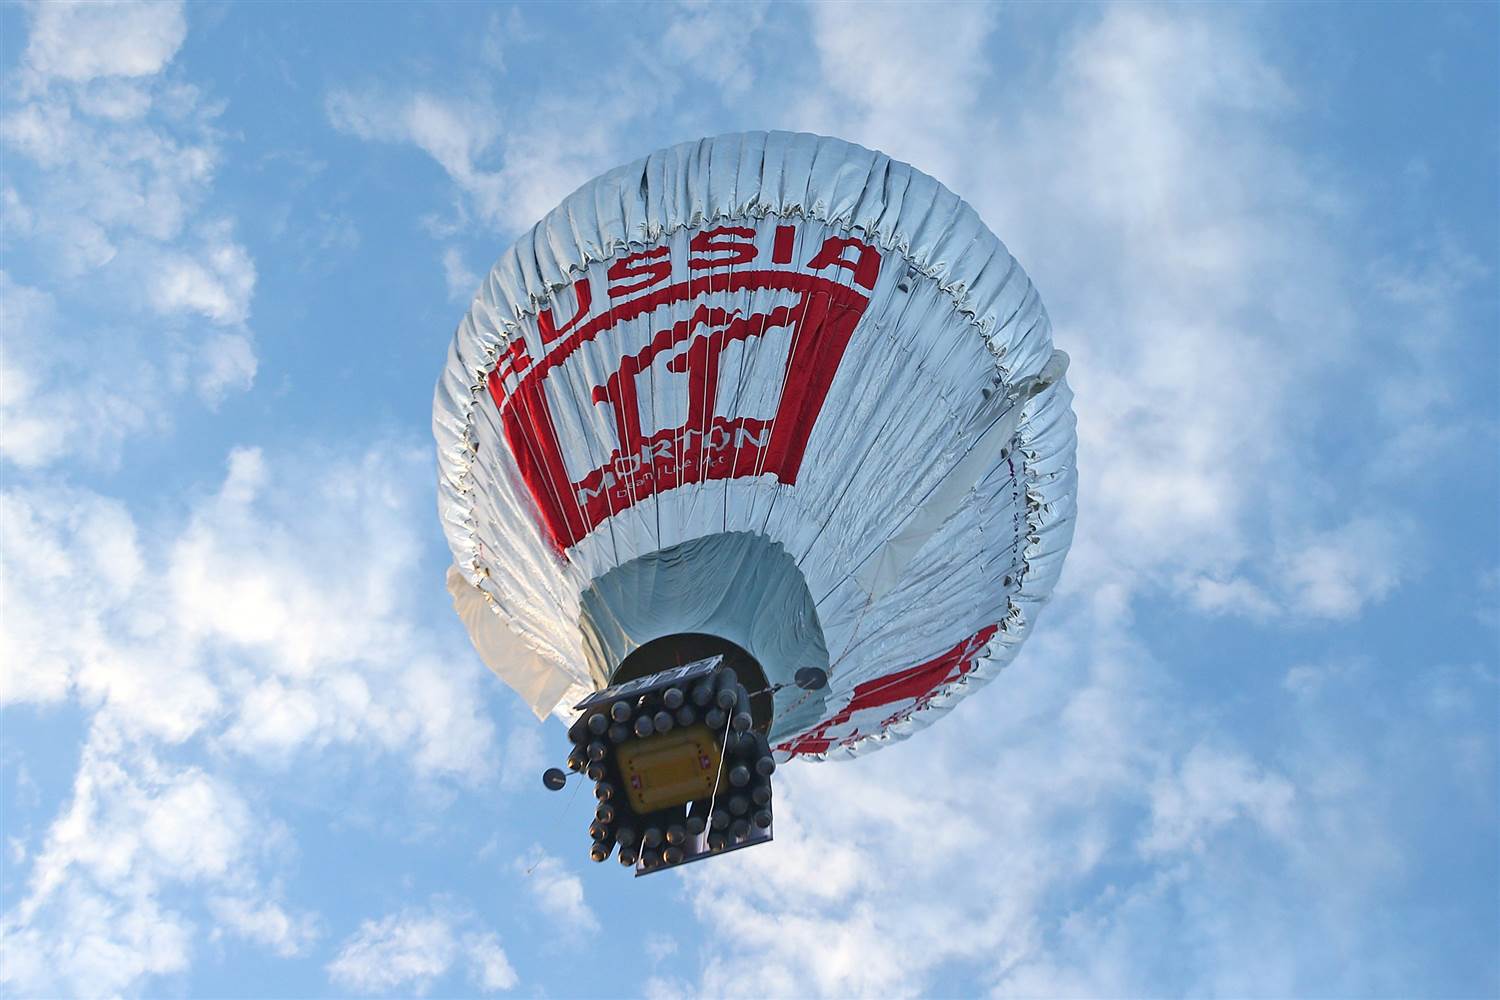 Russian Balloonist Claims New Round the World Record